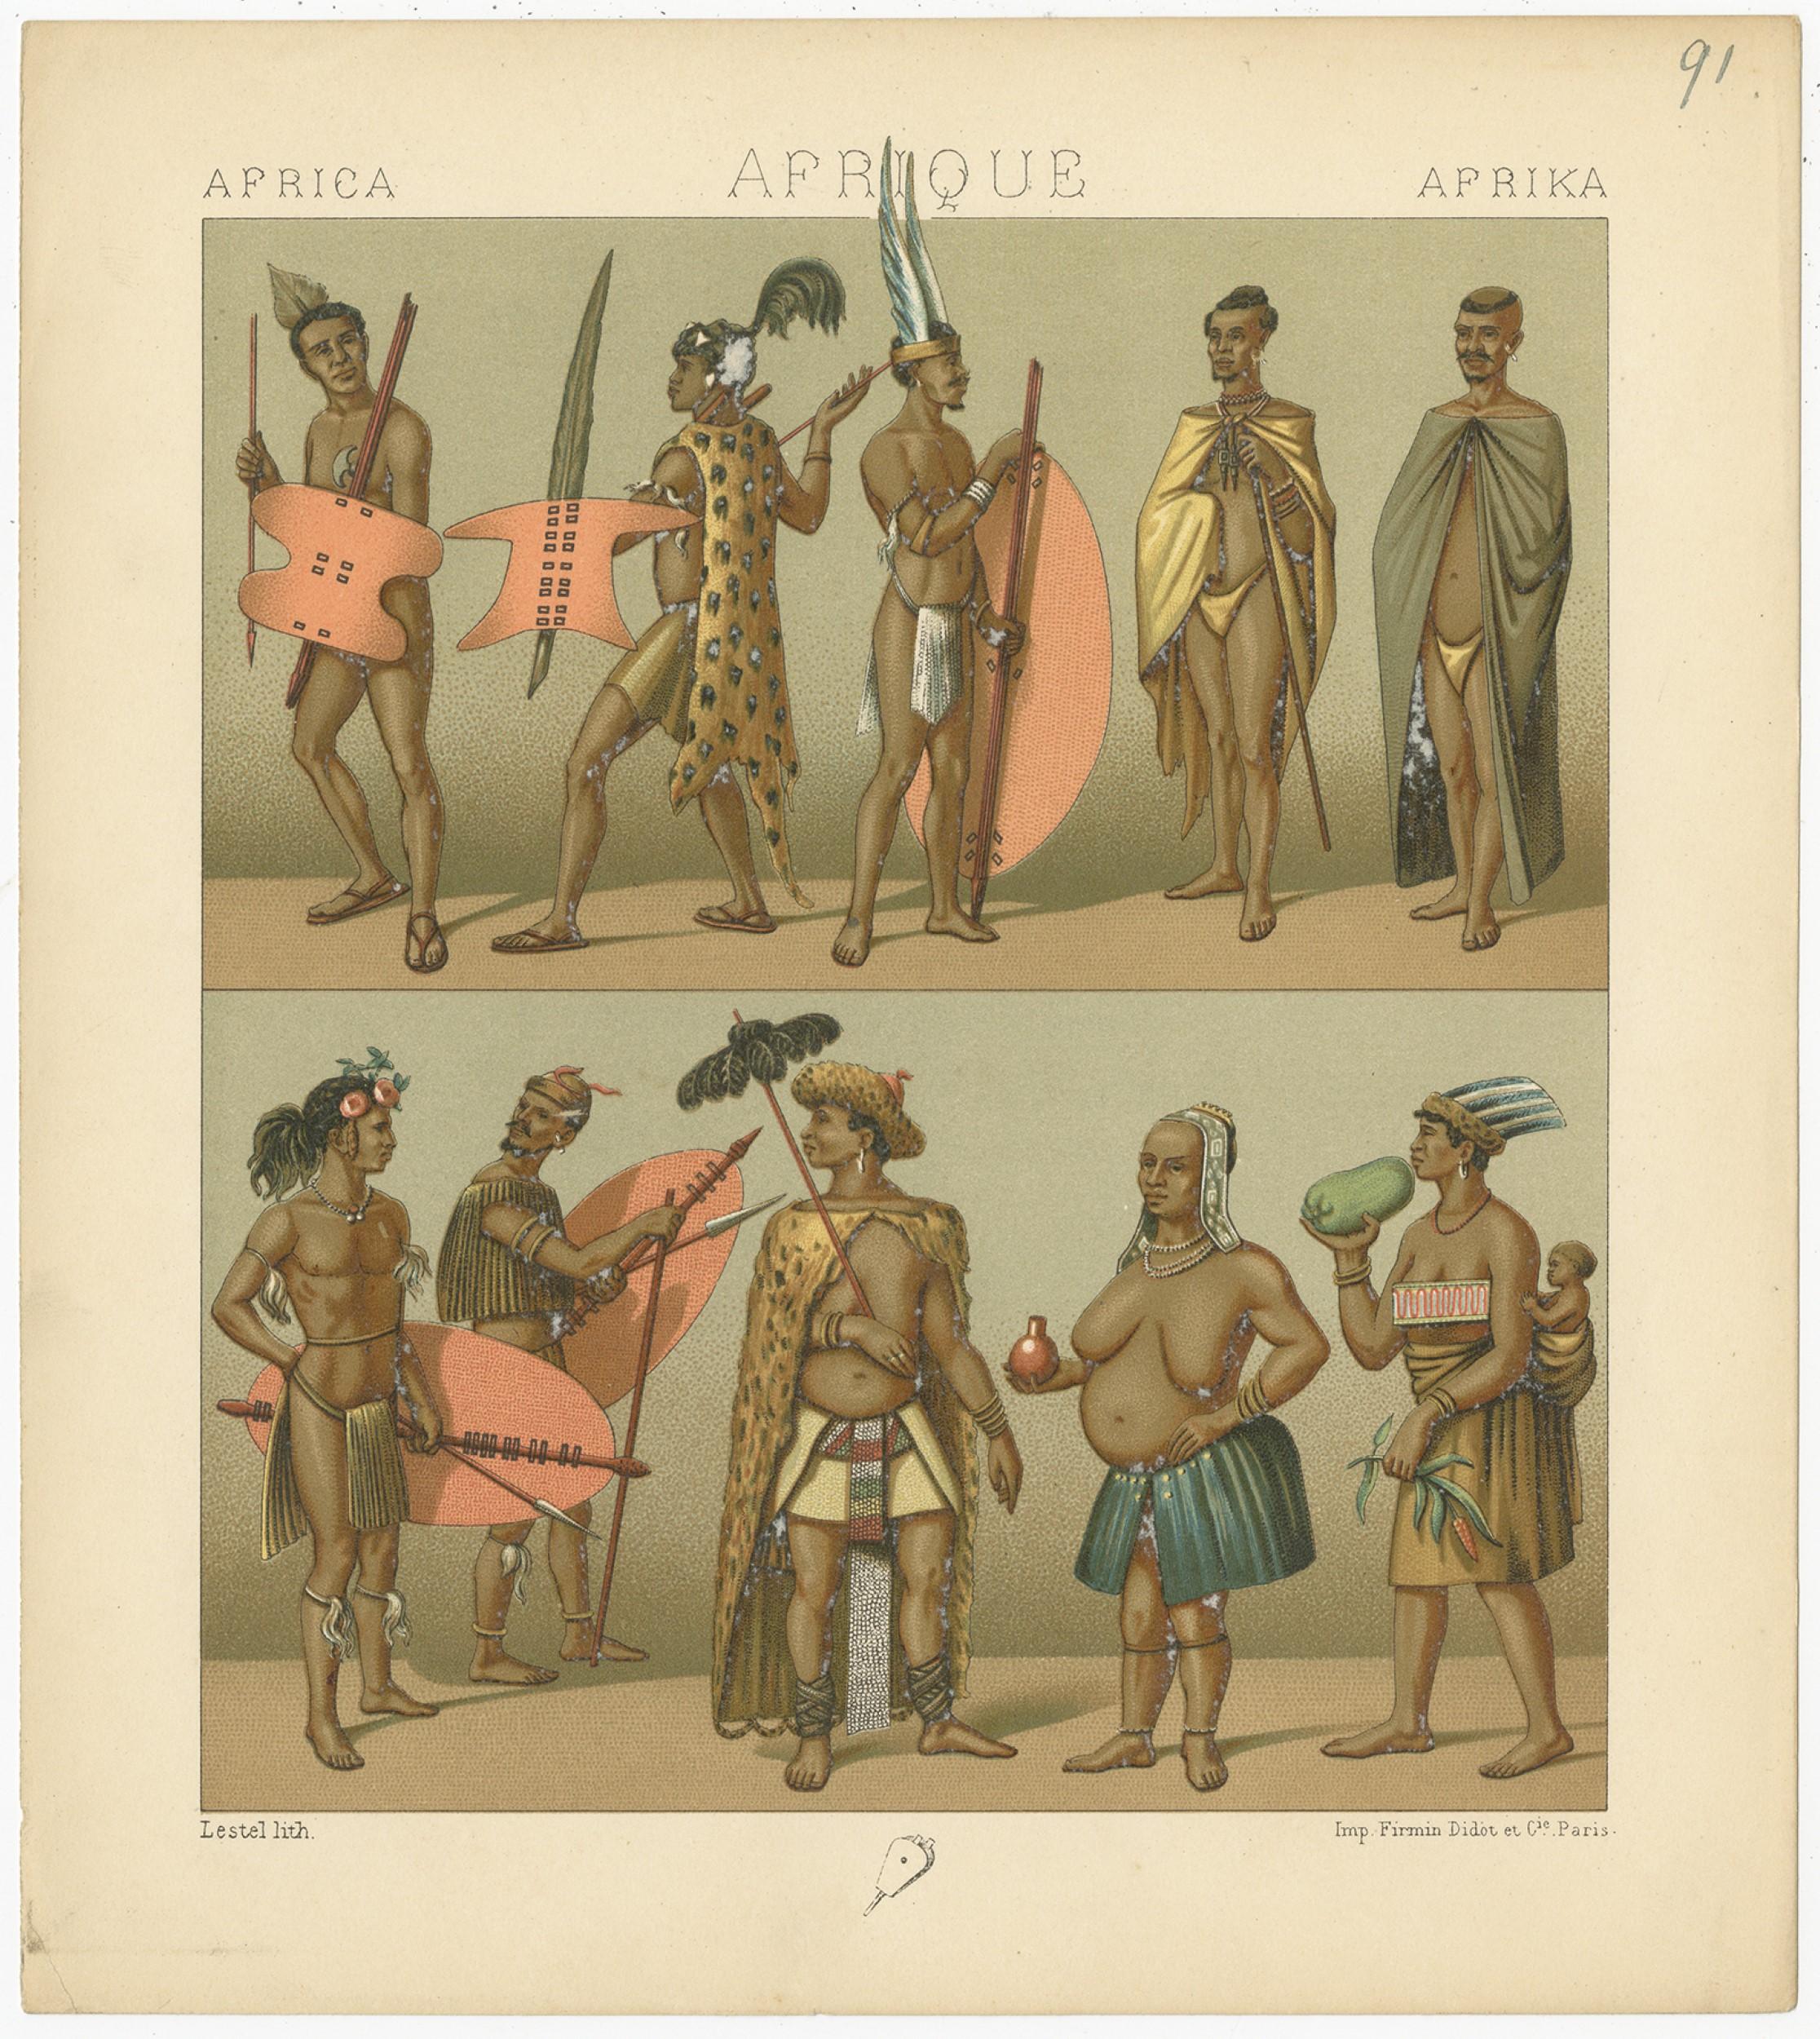 Antique print titled 'Africa - Afrique - Afrika'. Chromolithograph of African clothes. This print originates from 'Le Costume Historique' by M.A. Racinet. Published, circa 1880.